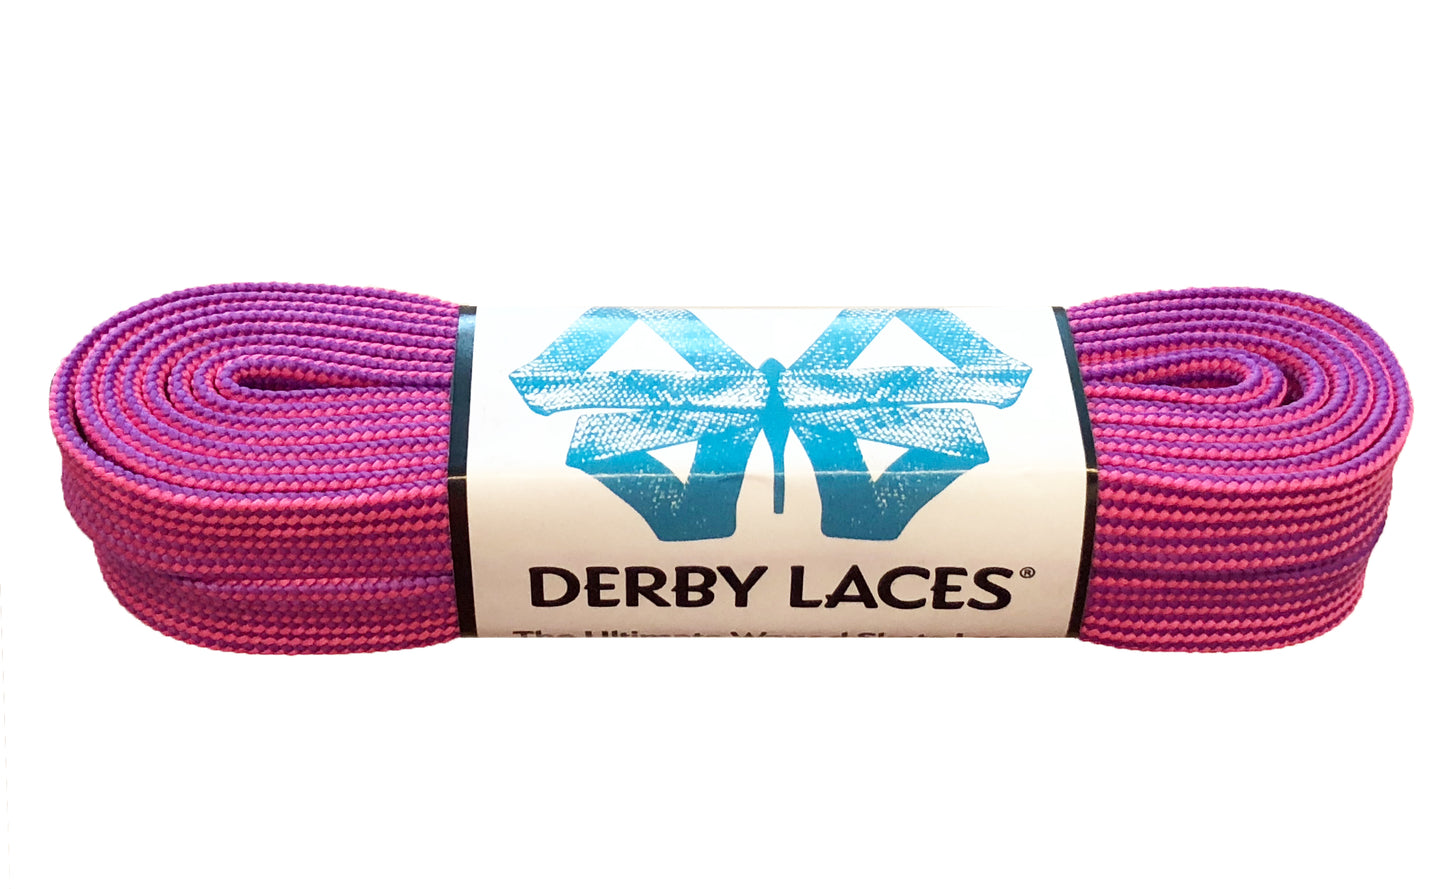 Purple and Hot Pink Stripe – 96 inch (244 cm) Derby Laces Waxed Roller Derby Skate Lace